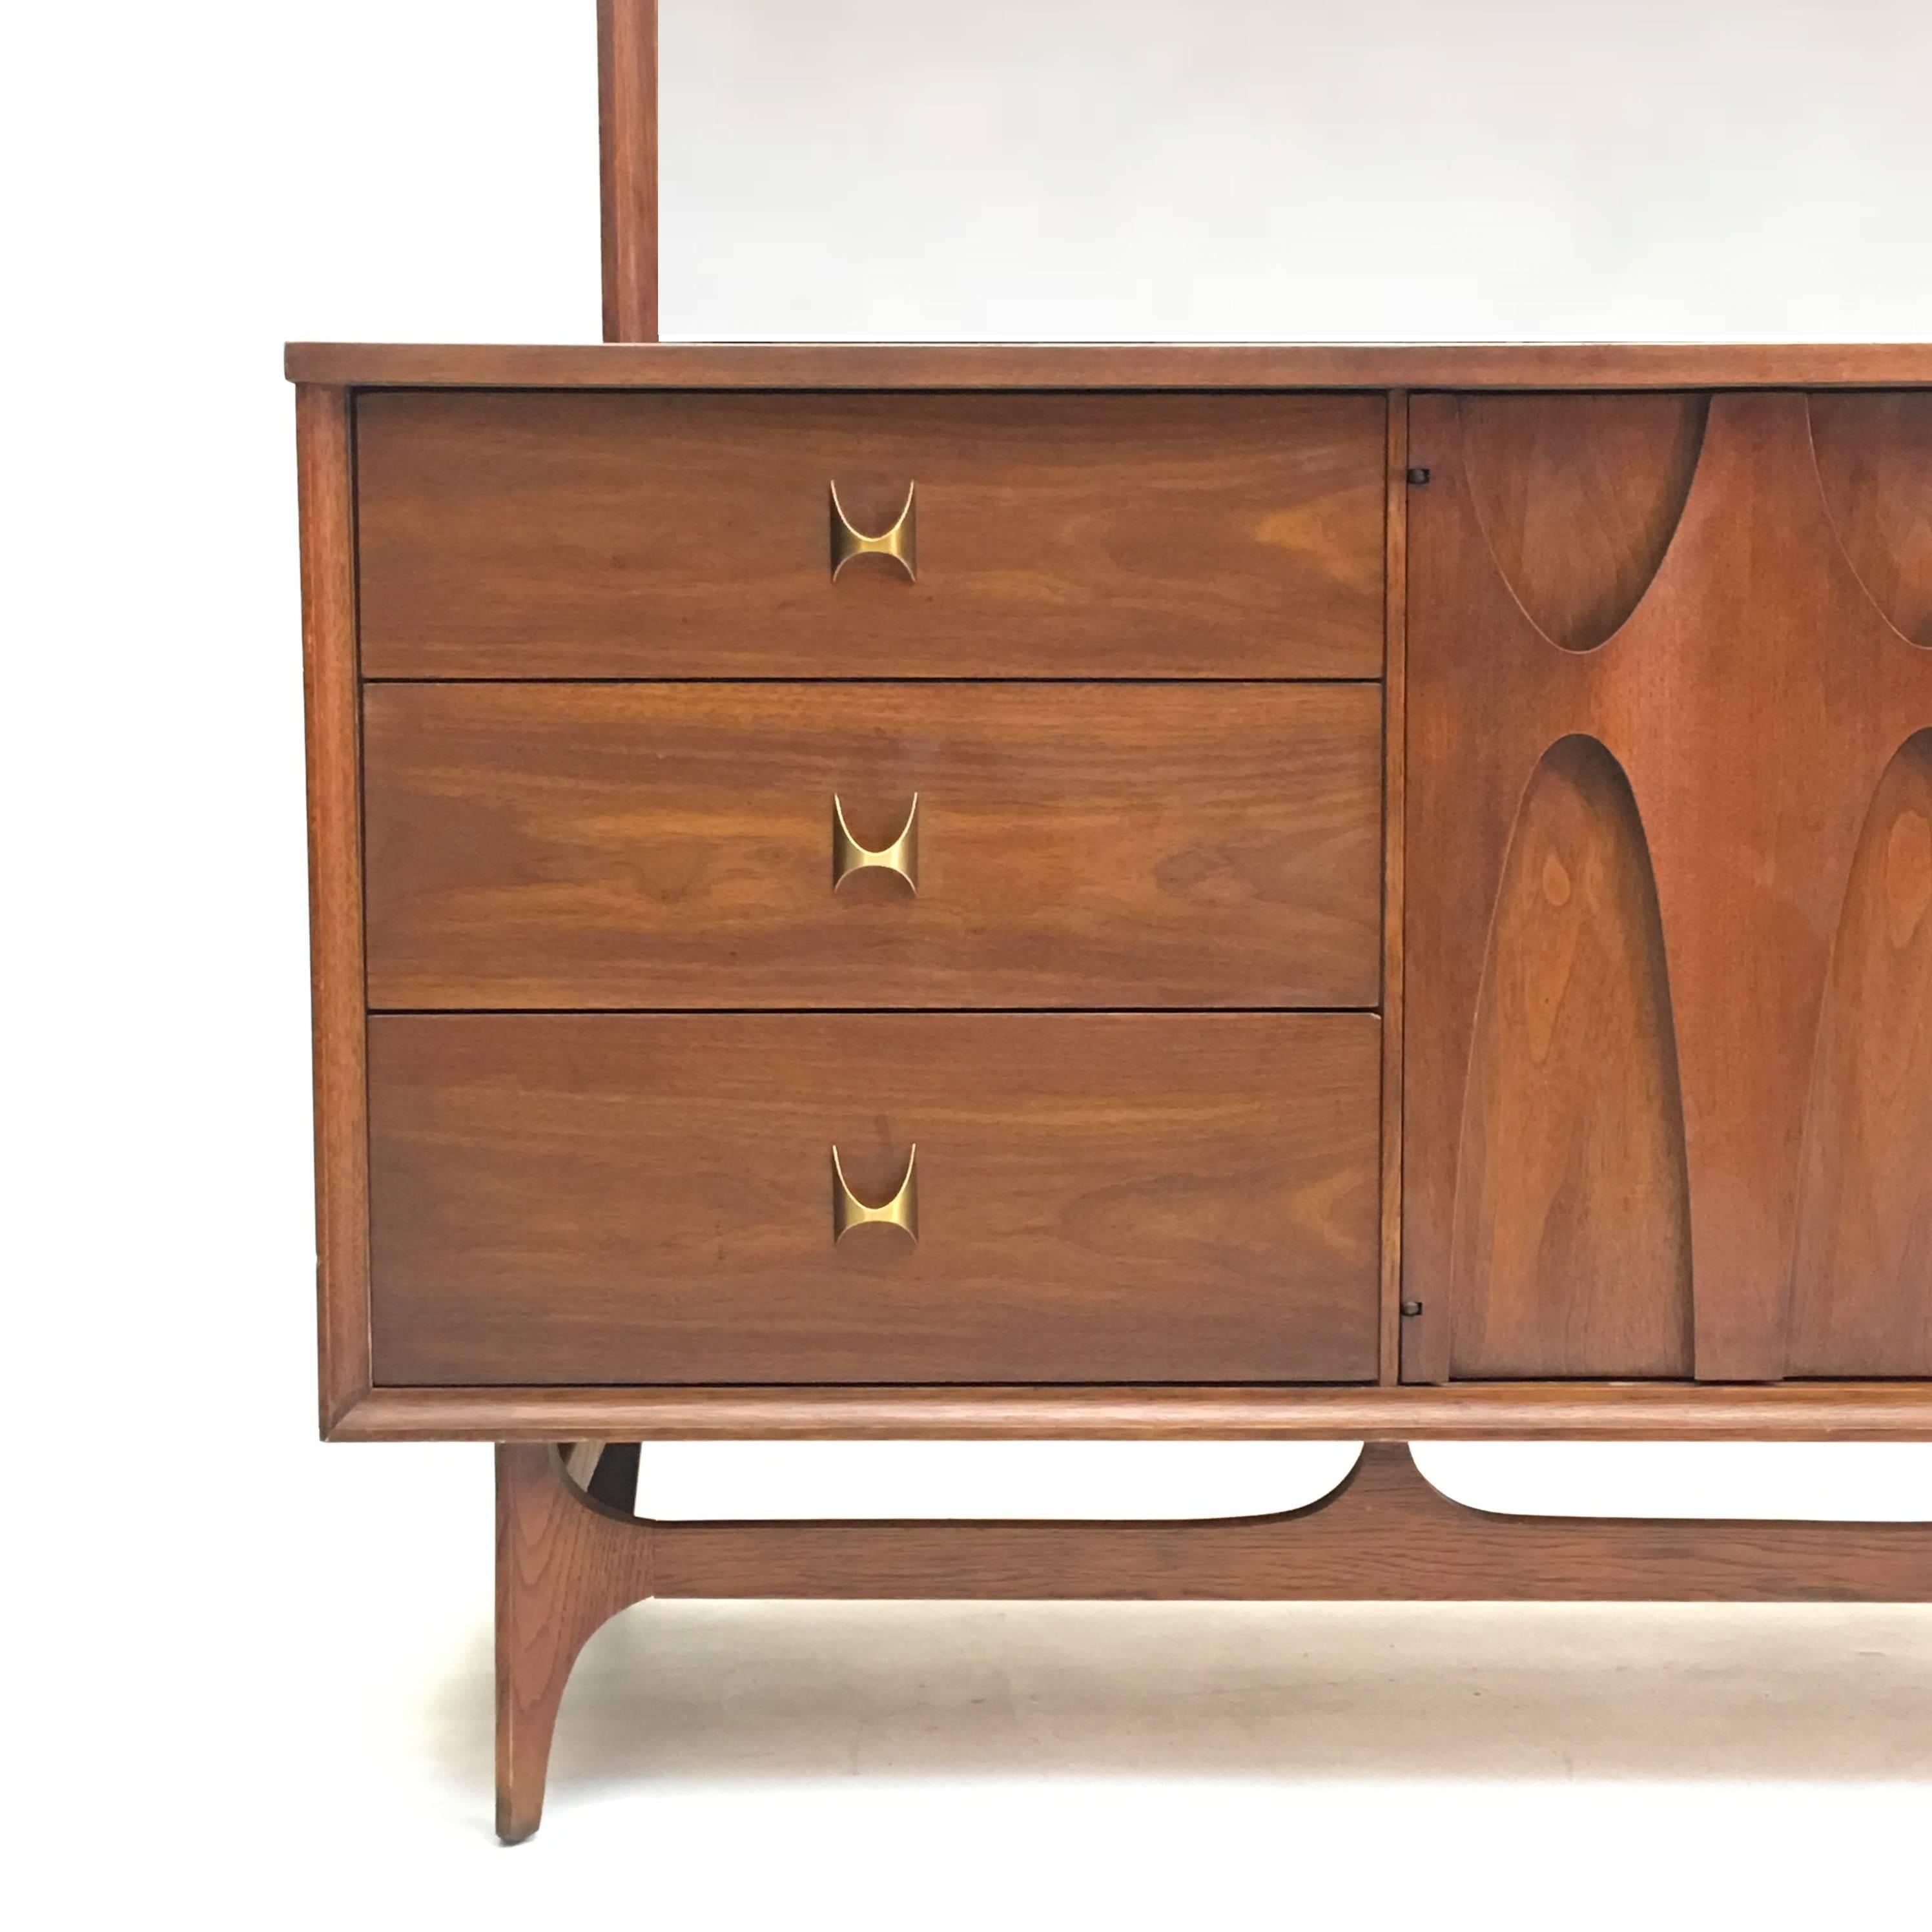 Lavish walnut coupled with brass accents make this triple dresser from Broyhill Brasilia Premier one of the finest dressers to be owned. Renown for the use of rich thick American walnut and solid construction, Broyhill Brasilia bedroom pieces are